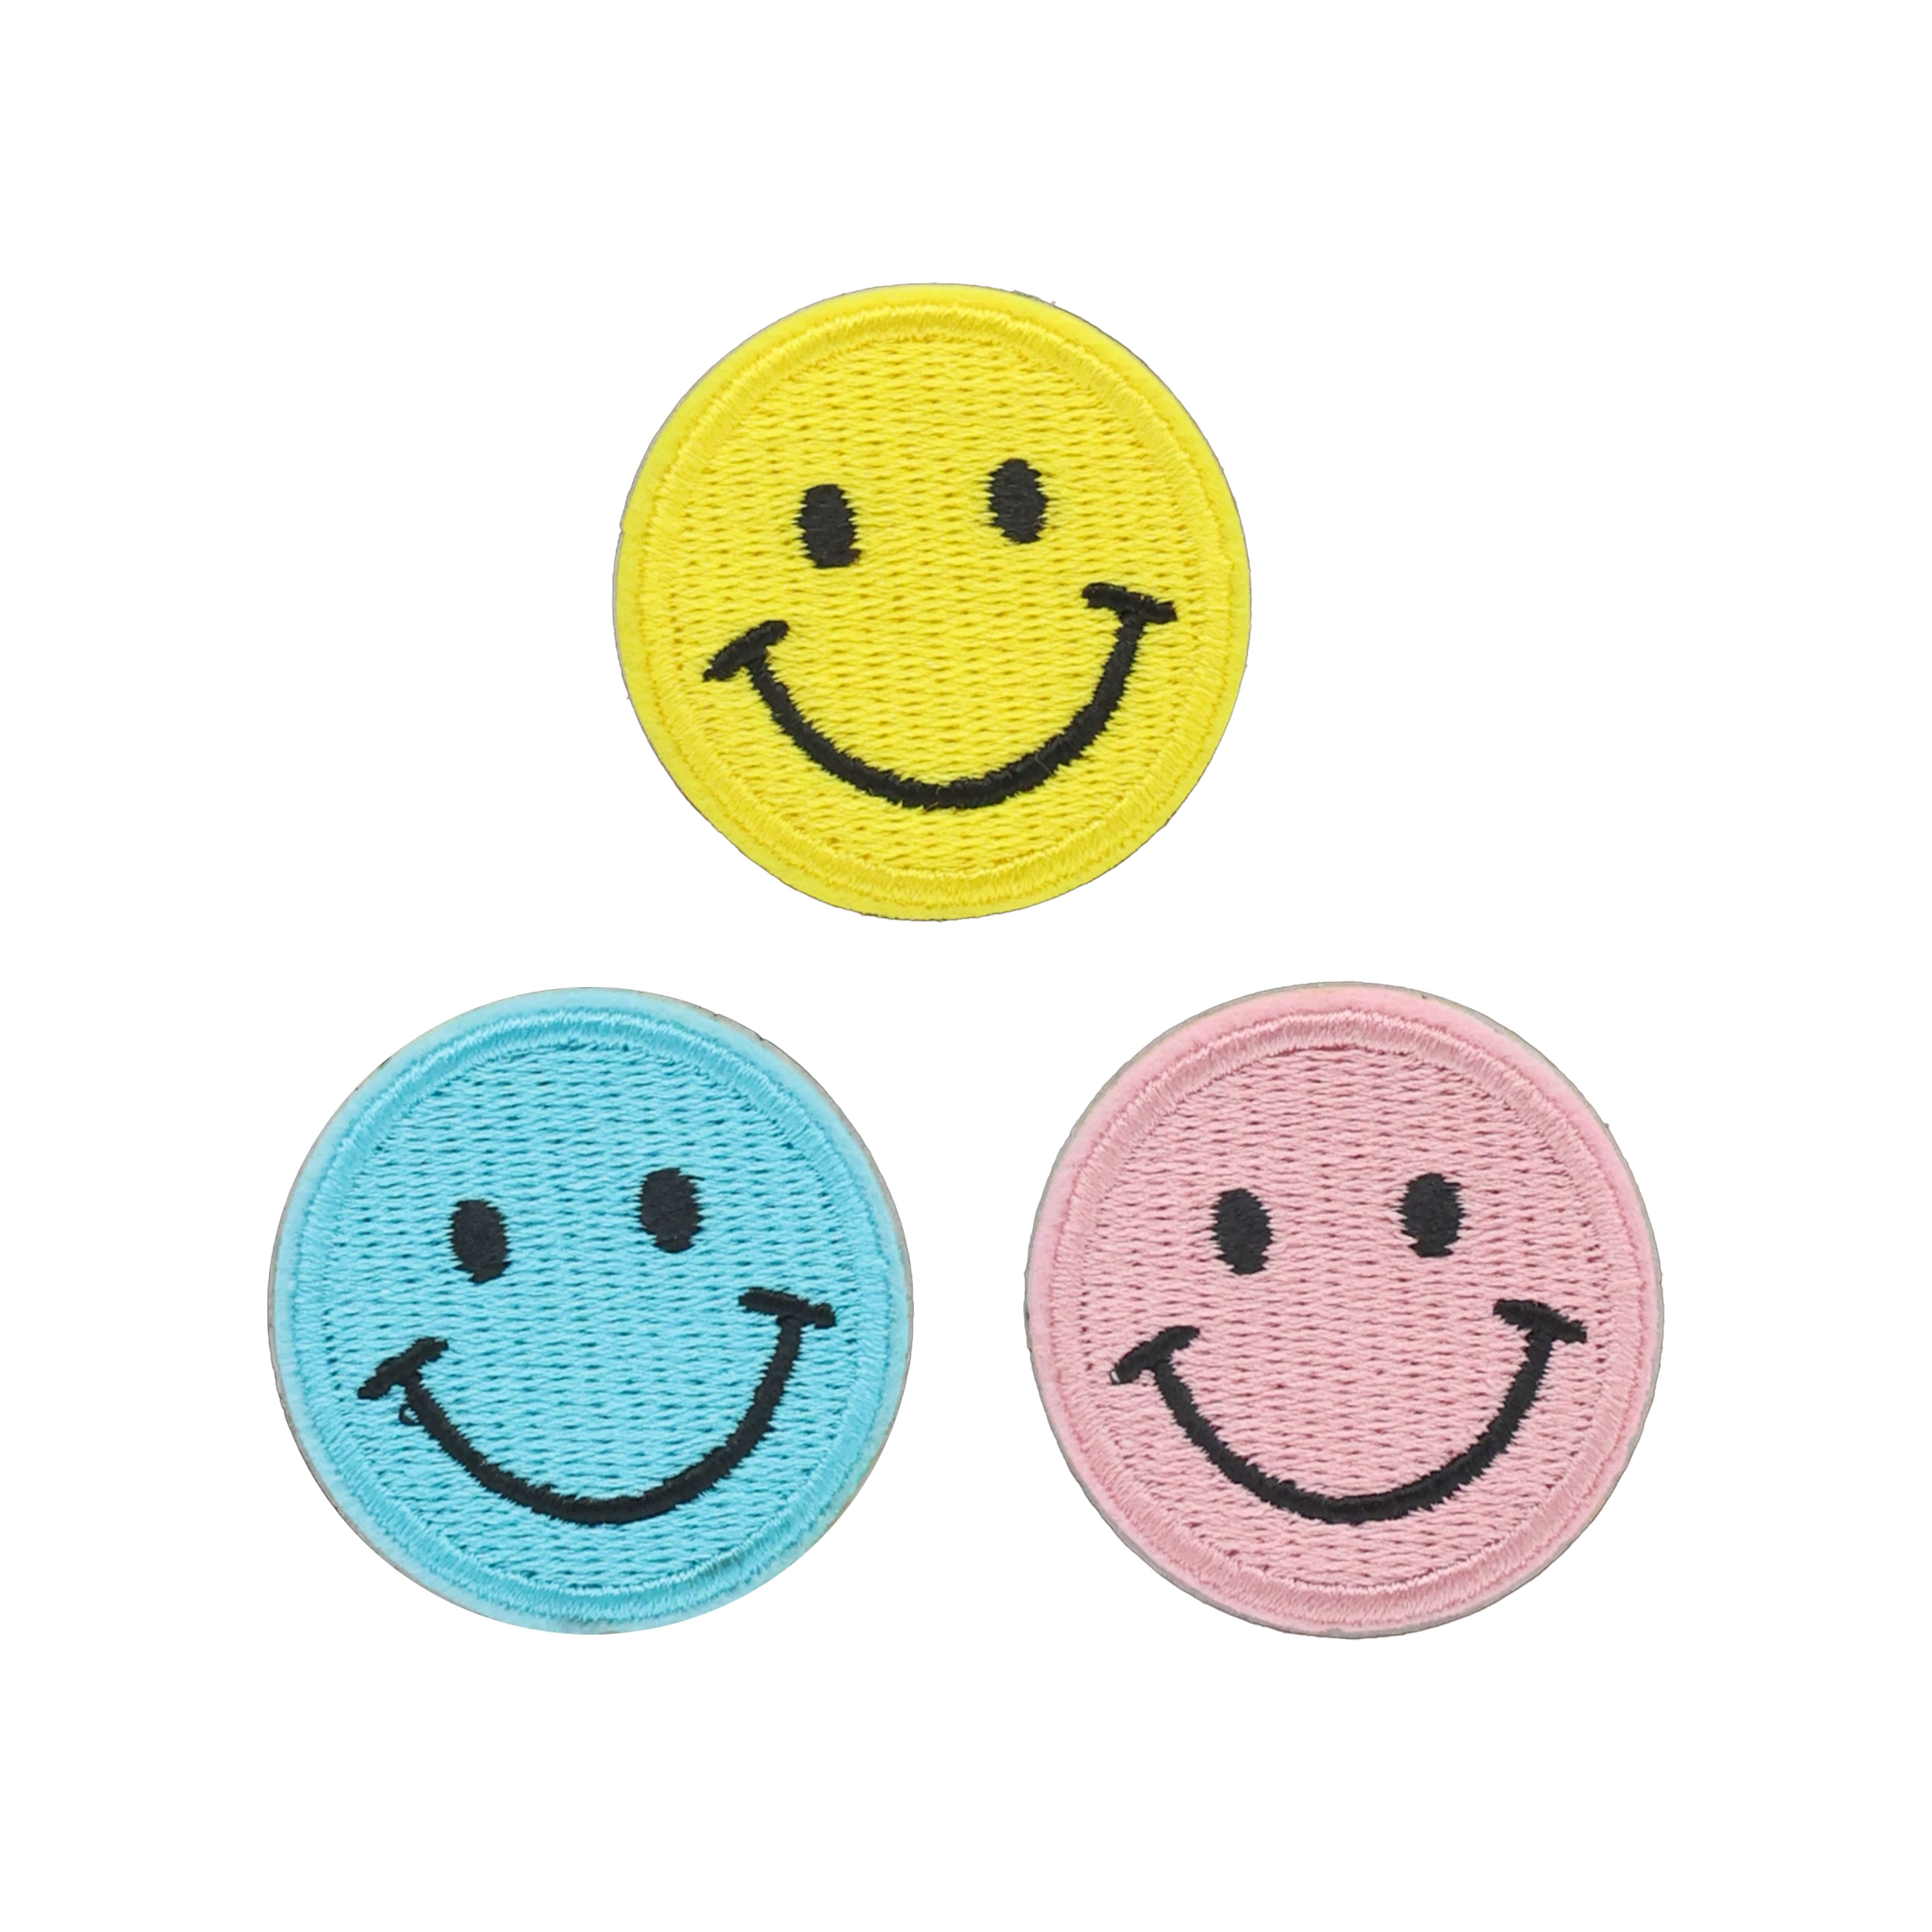 Smiley Face Iron On Patches, 3ct. by Make Market&#xAE;